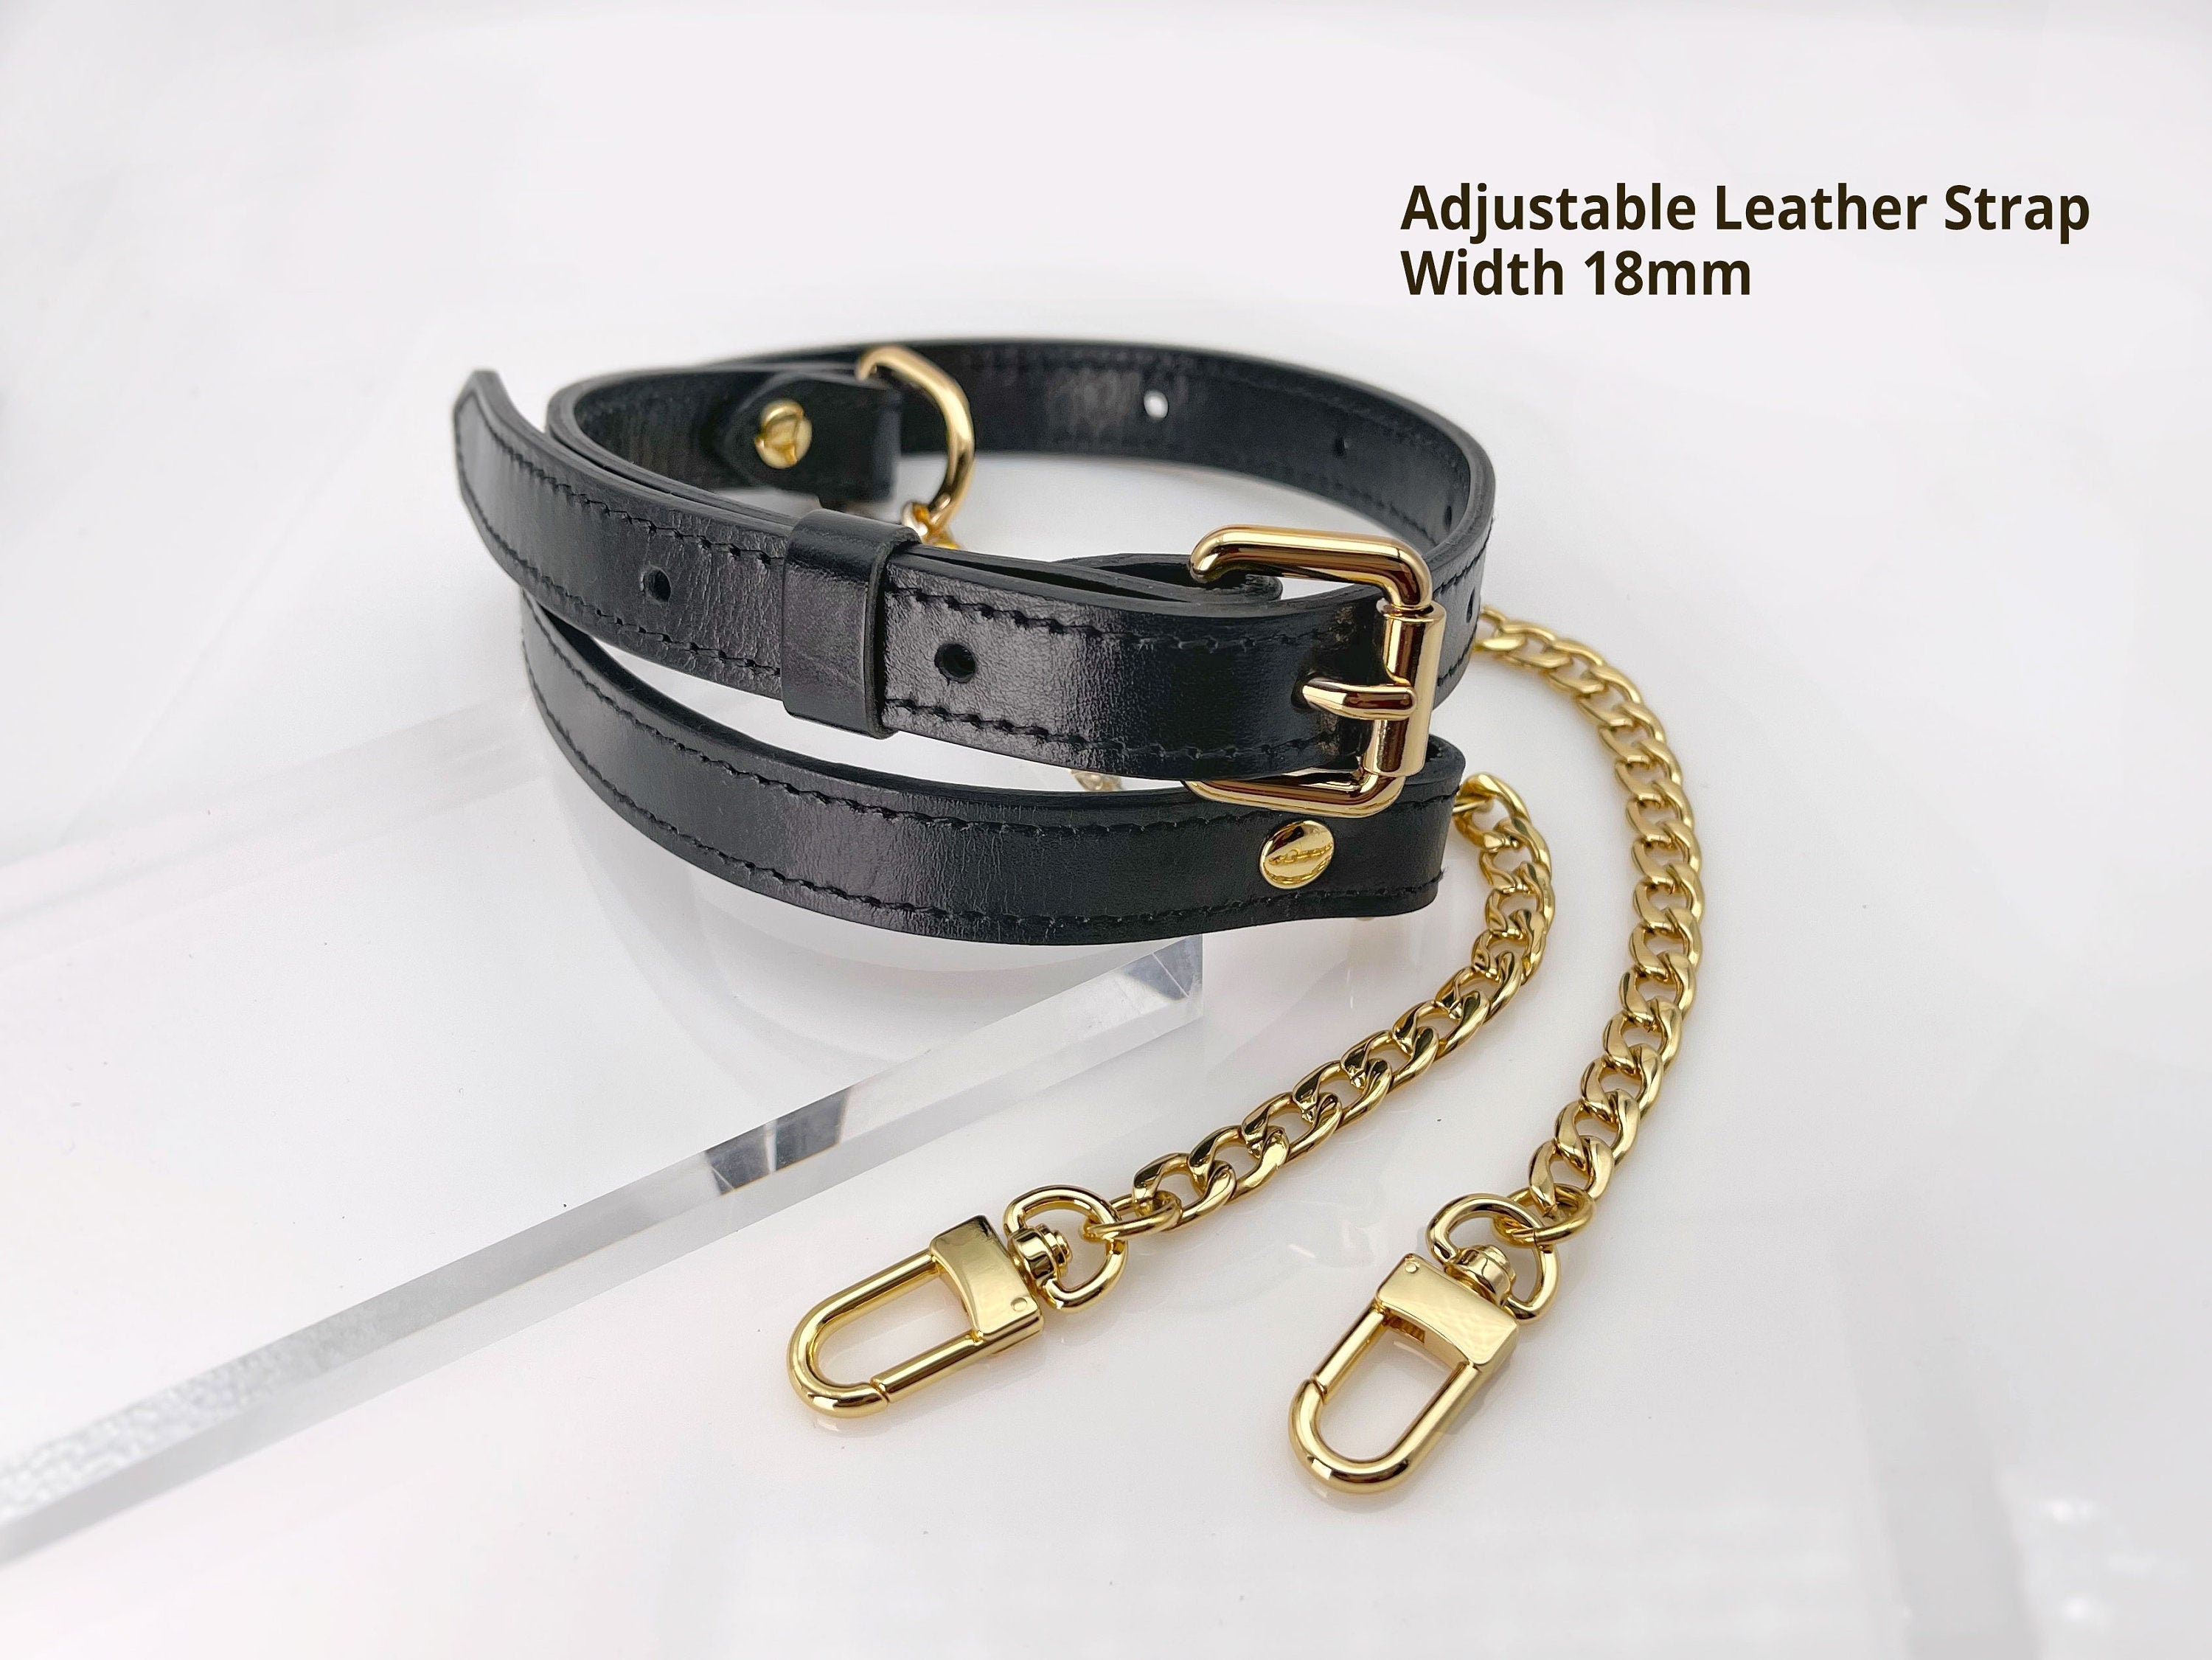 Classic GOLD Chain Bag Strap With Leather Weaved/threaded Through